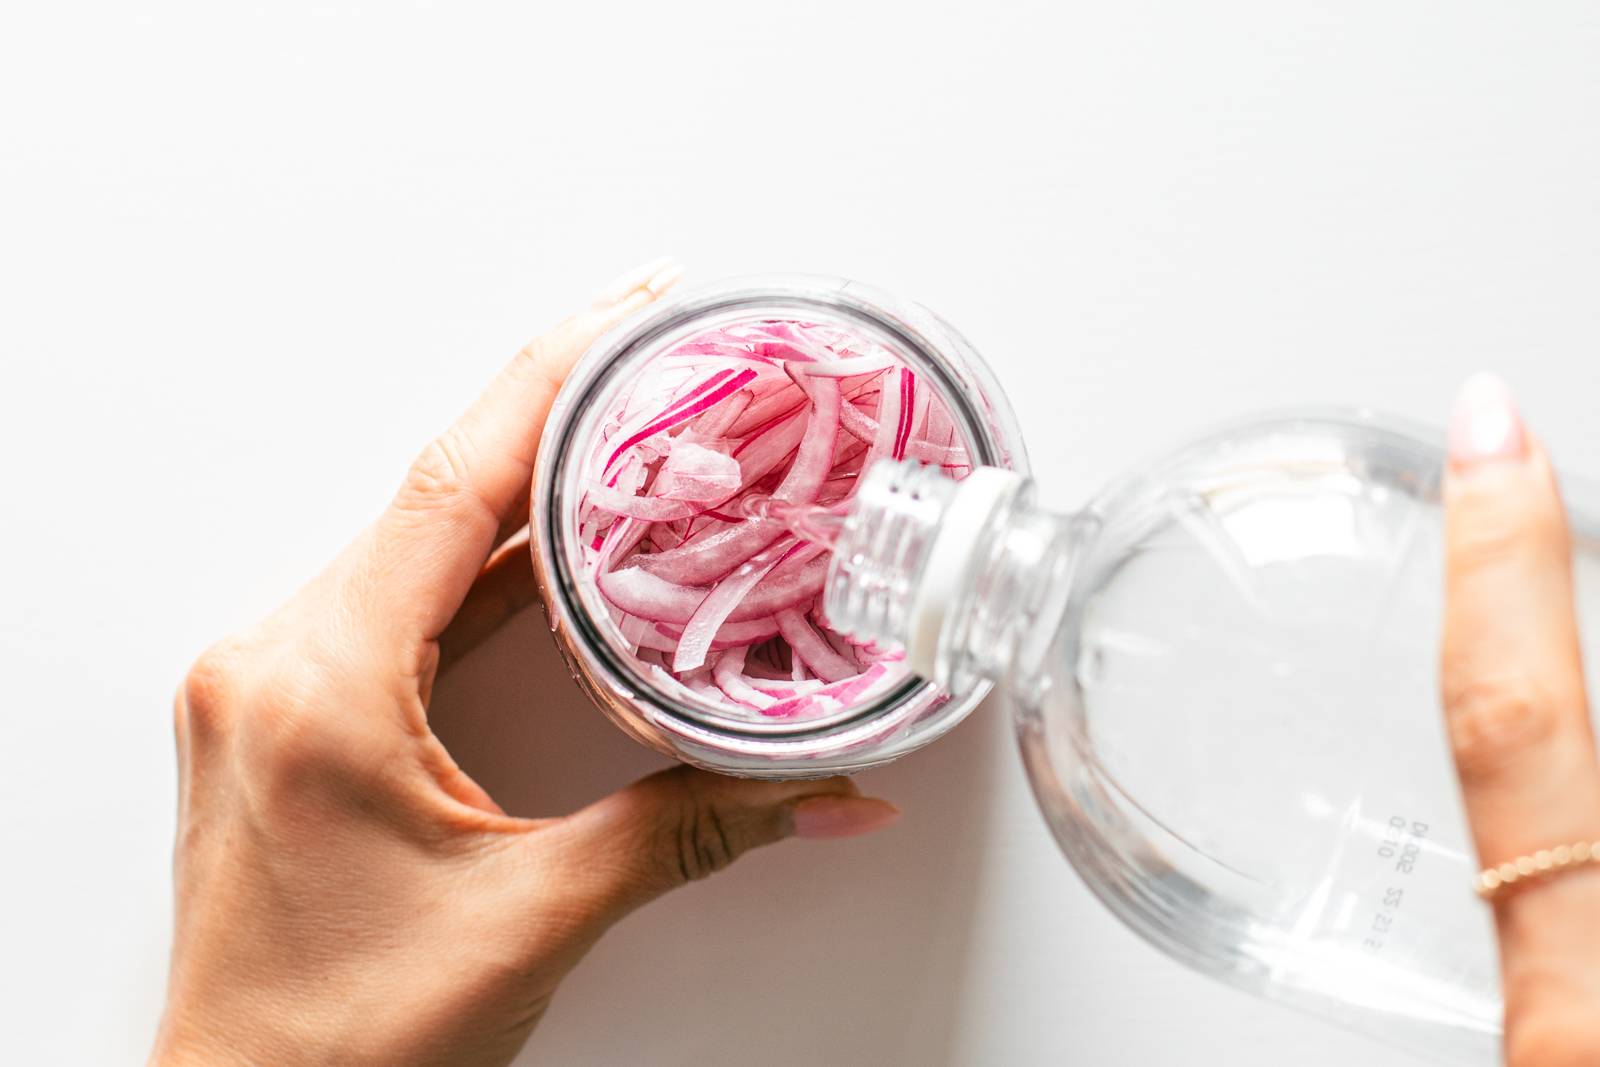 White vinegar being poured into a jar of red onions.